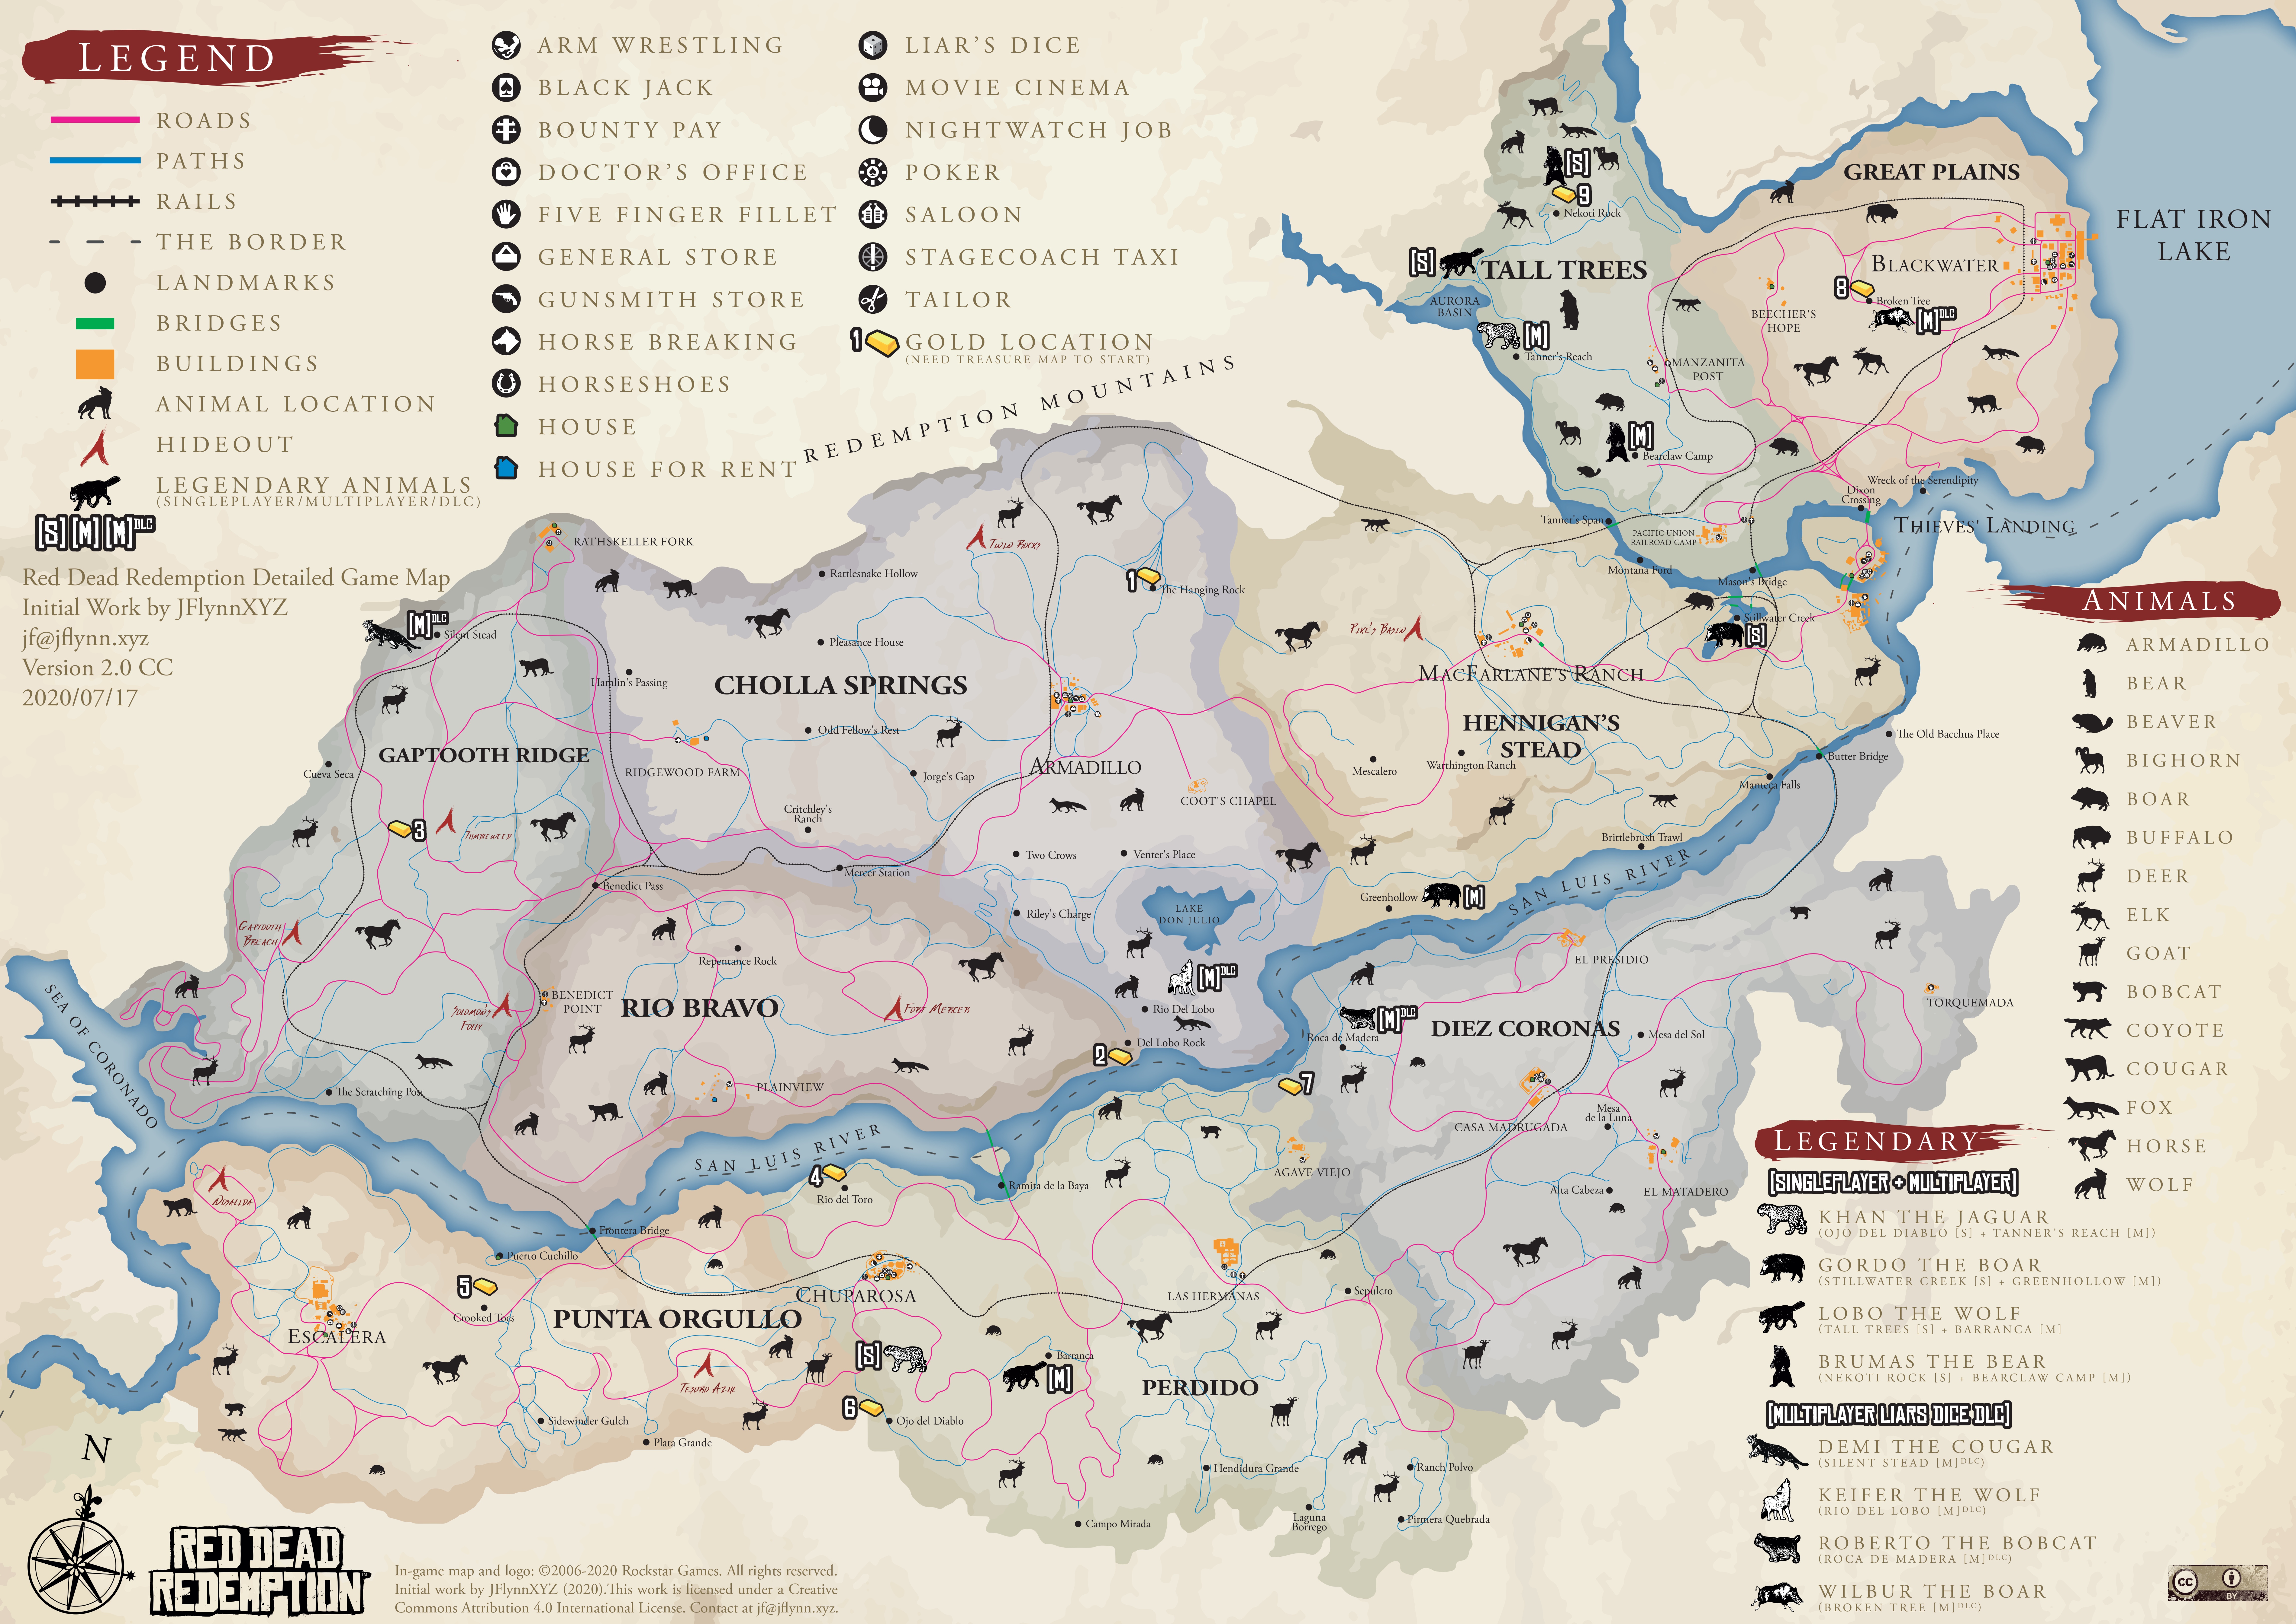 red dead redemption 2 pick up interactive map